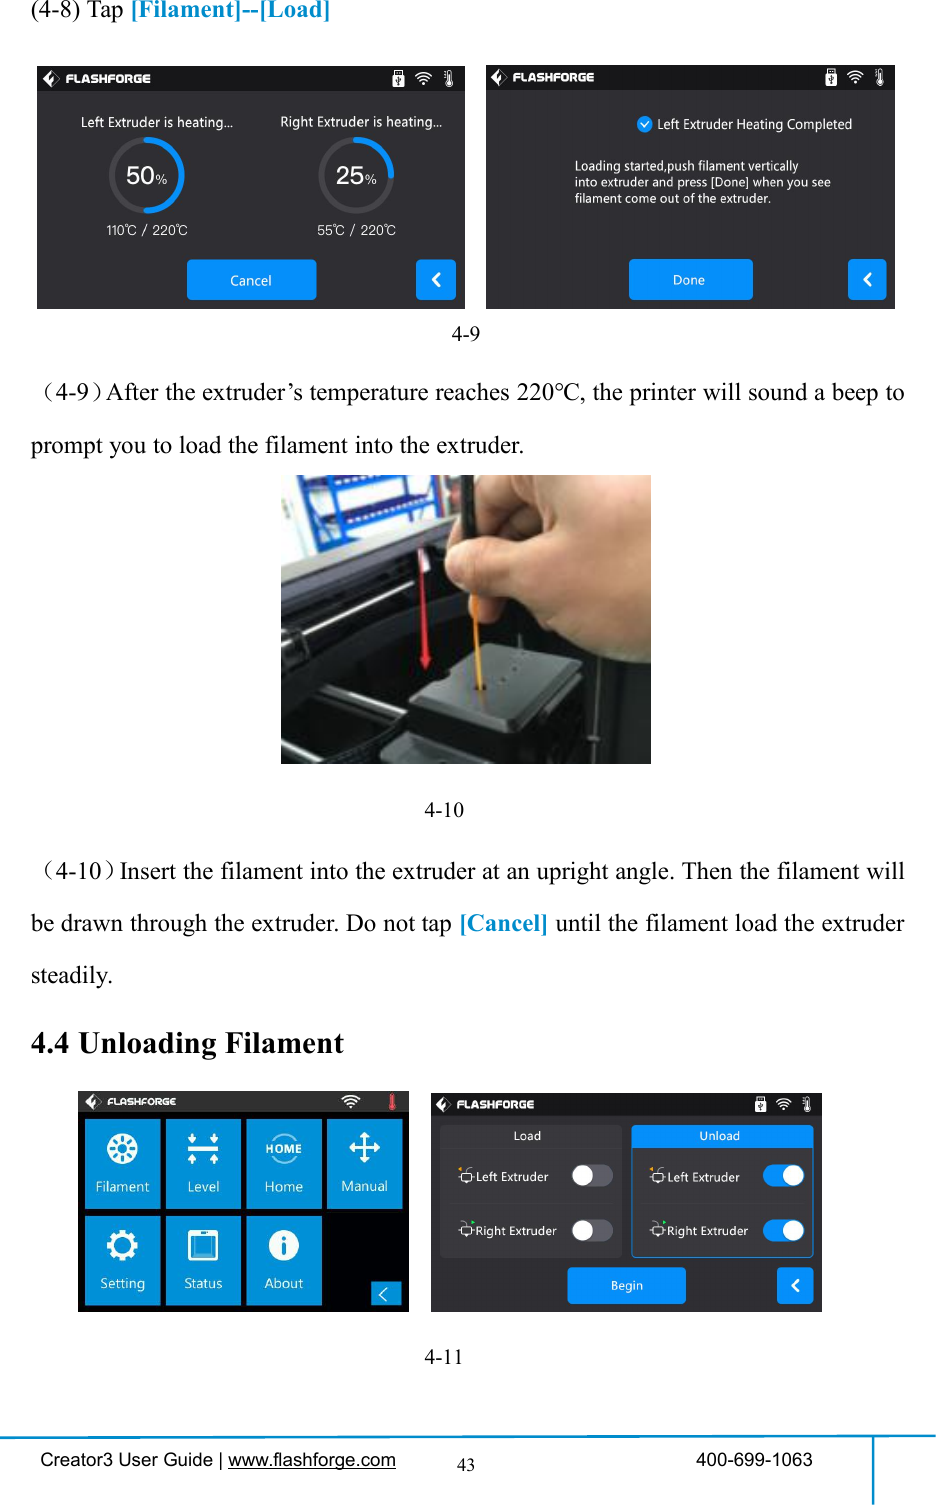 Creator3 User Guide | www.flashforge.com 400-699-106343(4-8) Tap [Filament]--[Load]4-9（4-9）After the extruder’s temperature reaches 220℃, the printer will sound a beep toprompt you to load the filament into the extruder.4-10（4-10）Insert the filament into the extruder at an upright angle. Then the filament willbe drawn through the extruder. Do not tap [Cancel] until the filament load the extrudersteadily.4.4 Unloading Filament4-11